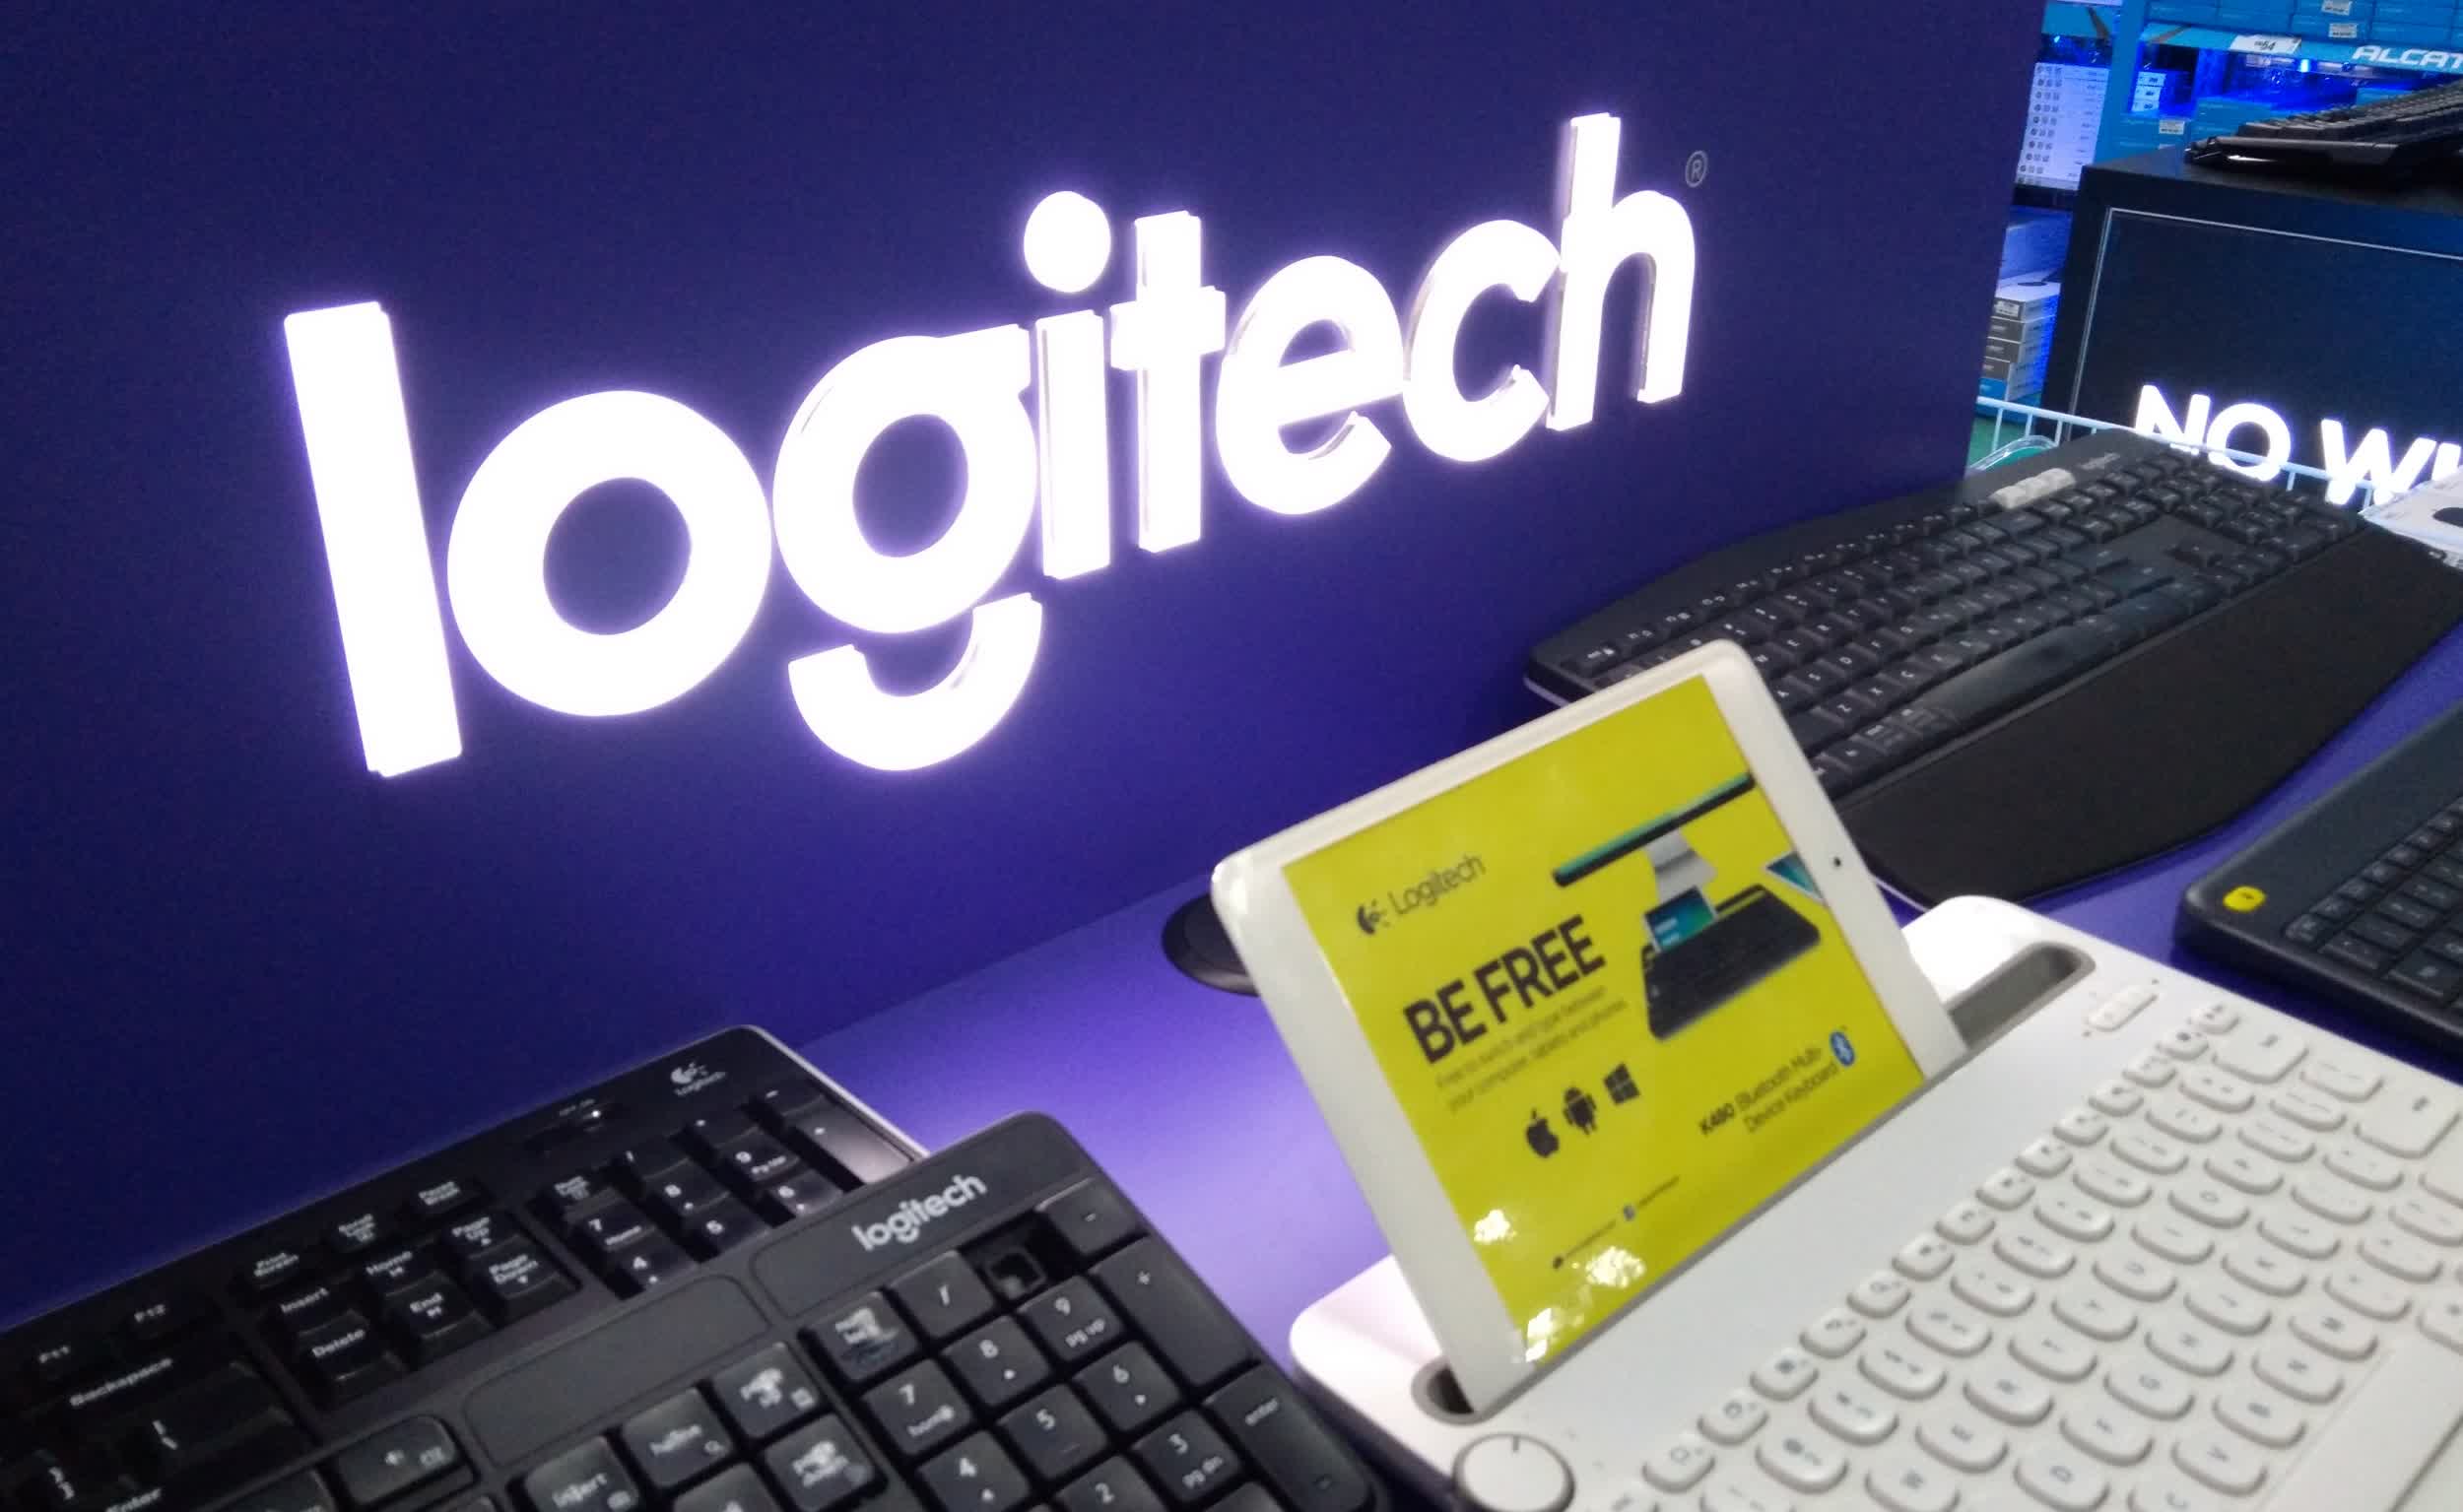 Logitech sales are soaring during the pandemic